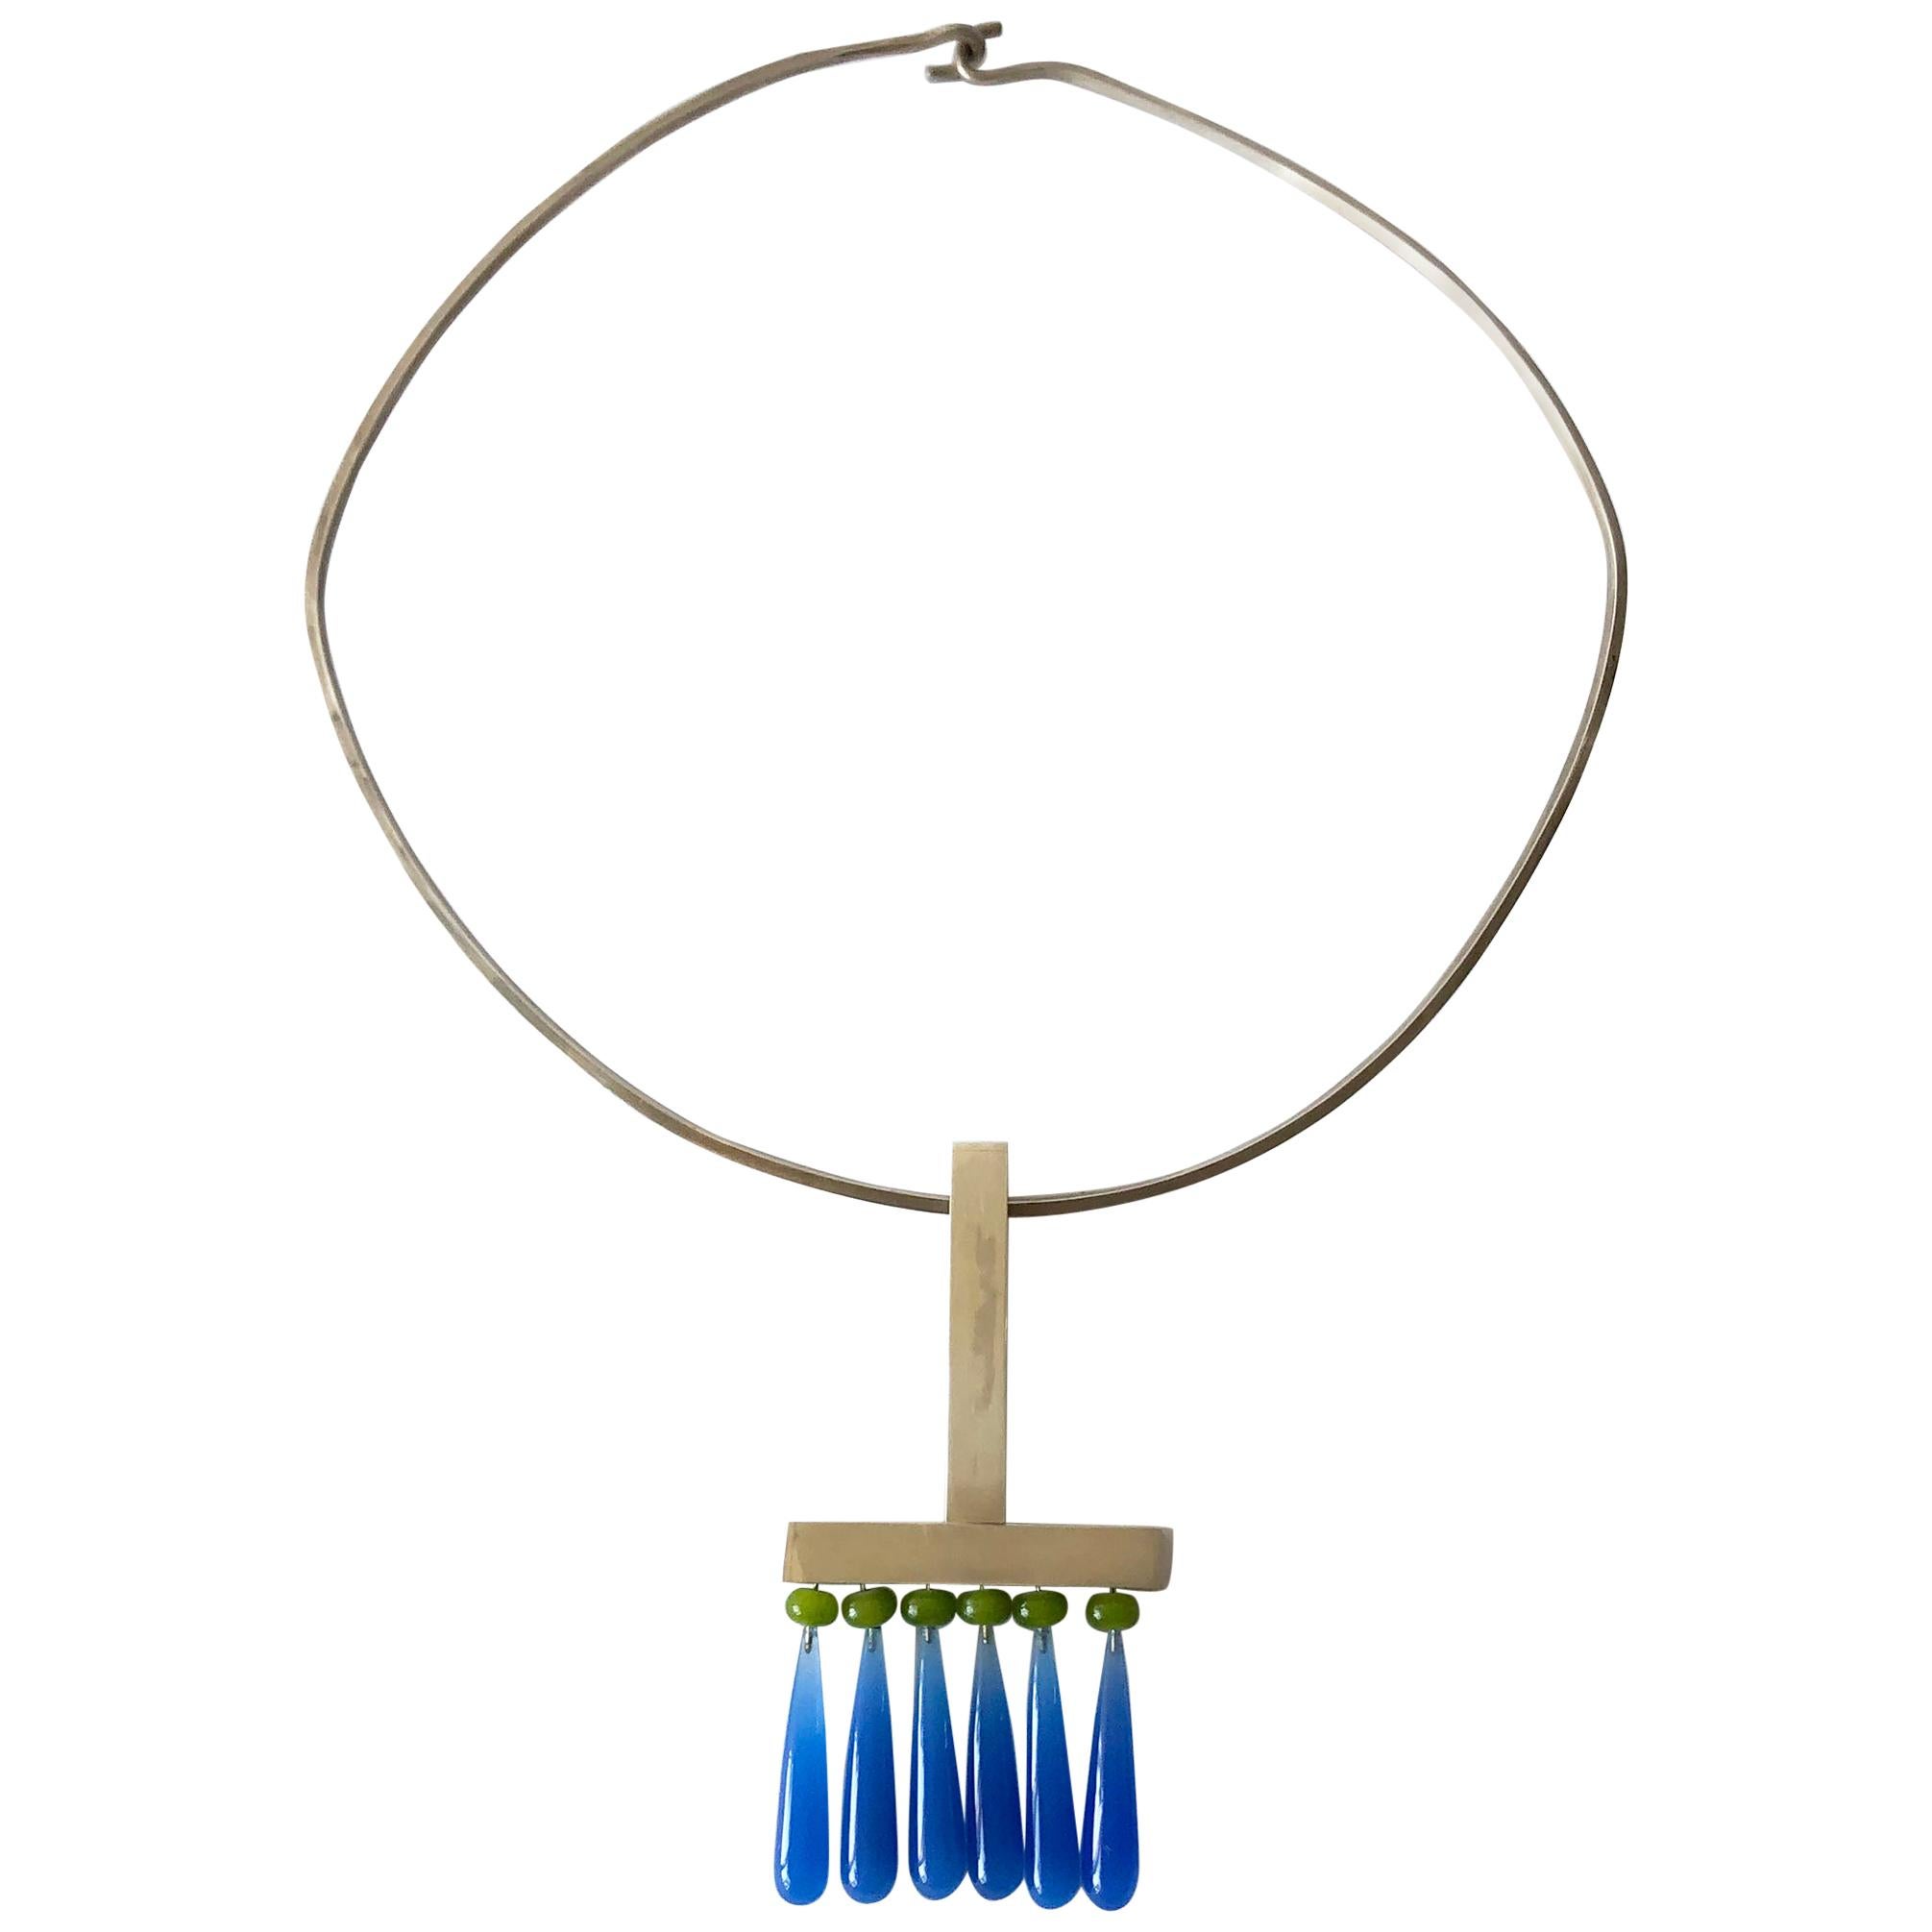 Heidi Abrahamson Sterling Silver Blue Onyx Architectural Modern Pendant Necklace